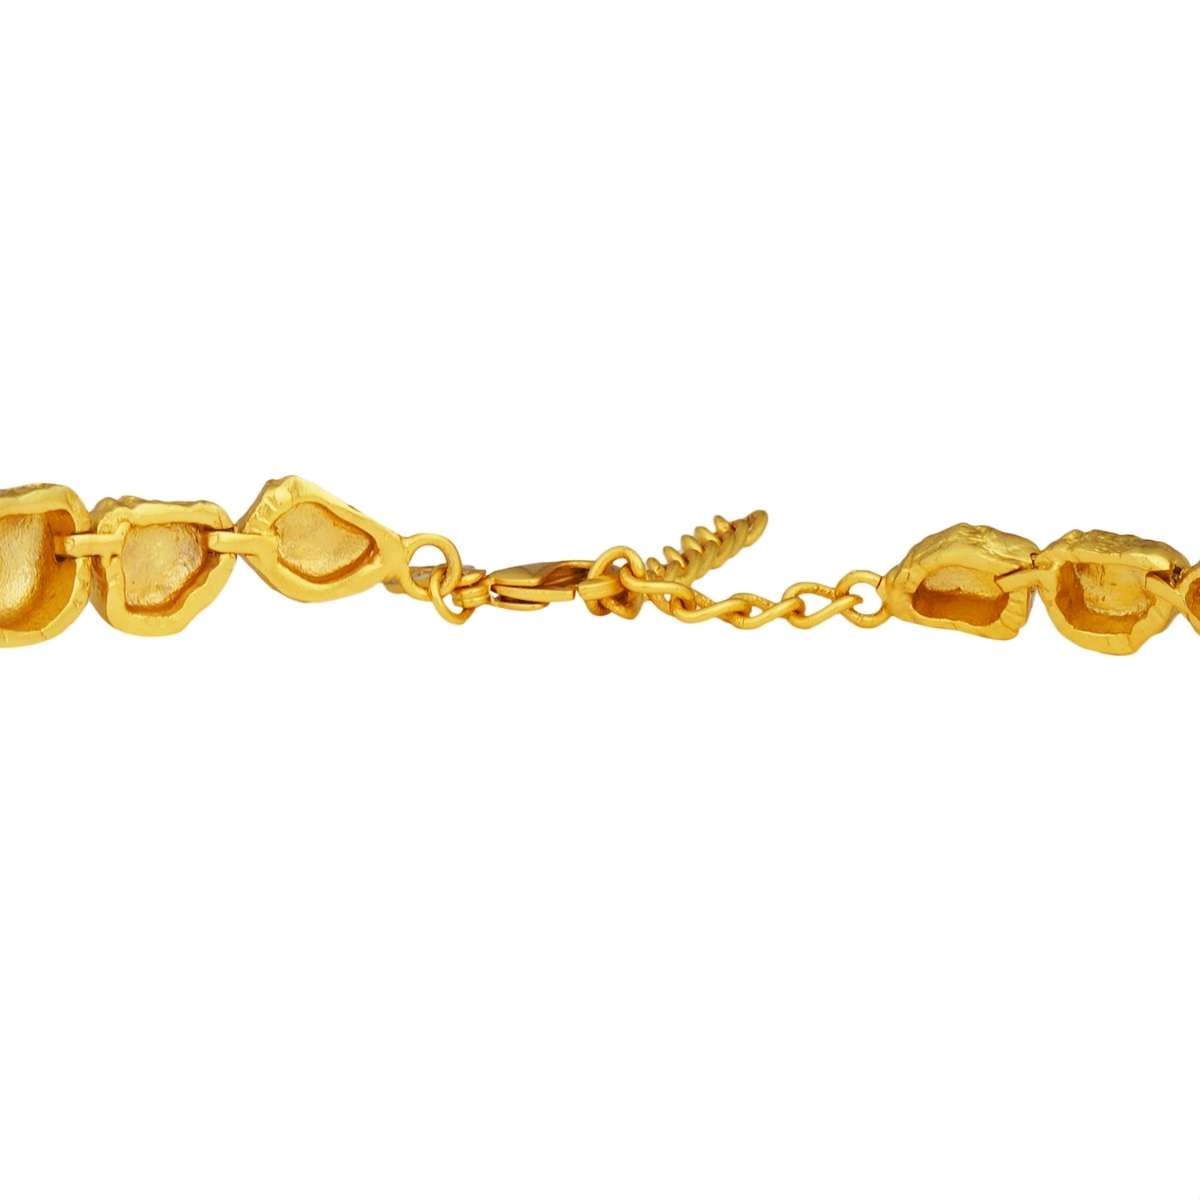 Gold nuggets Choker Necklace